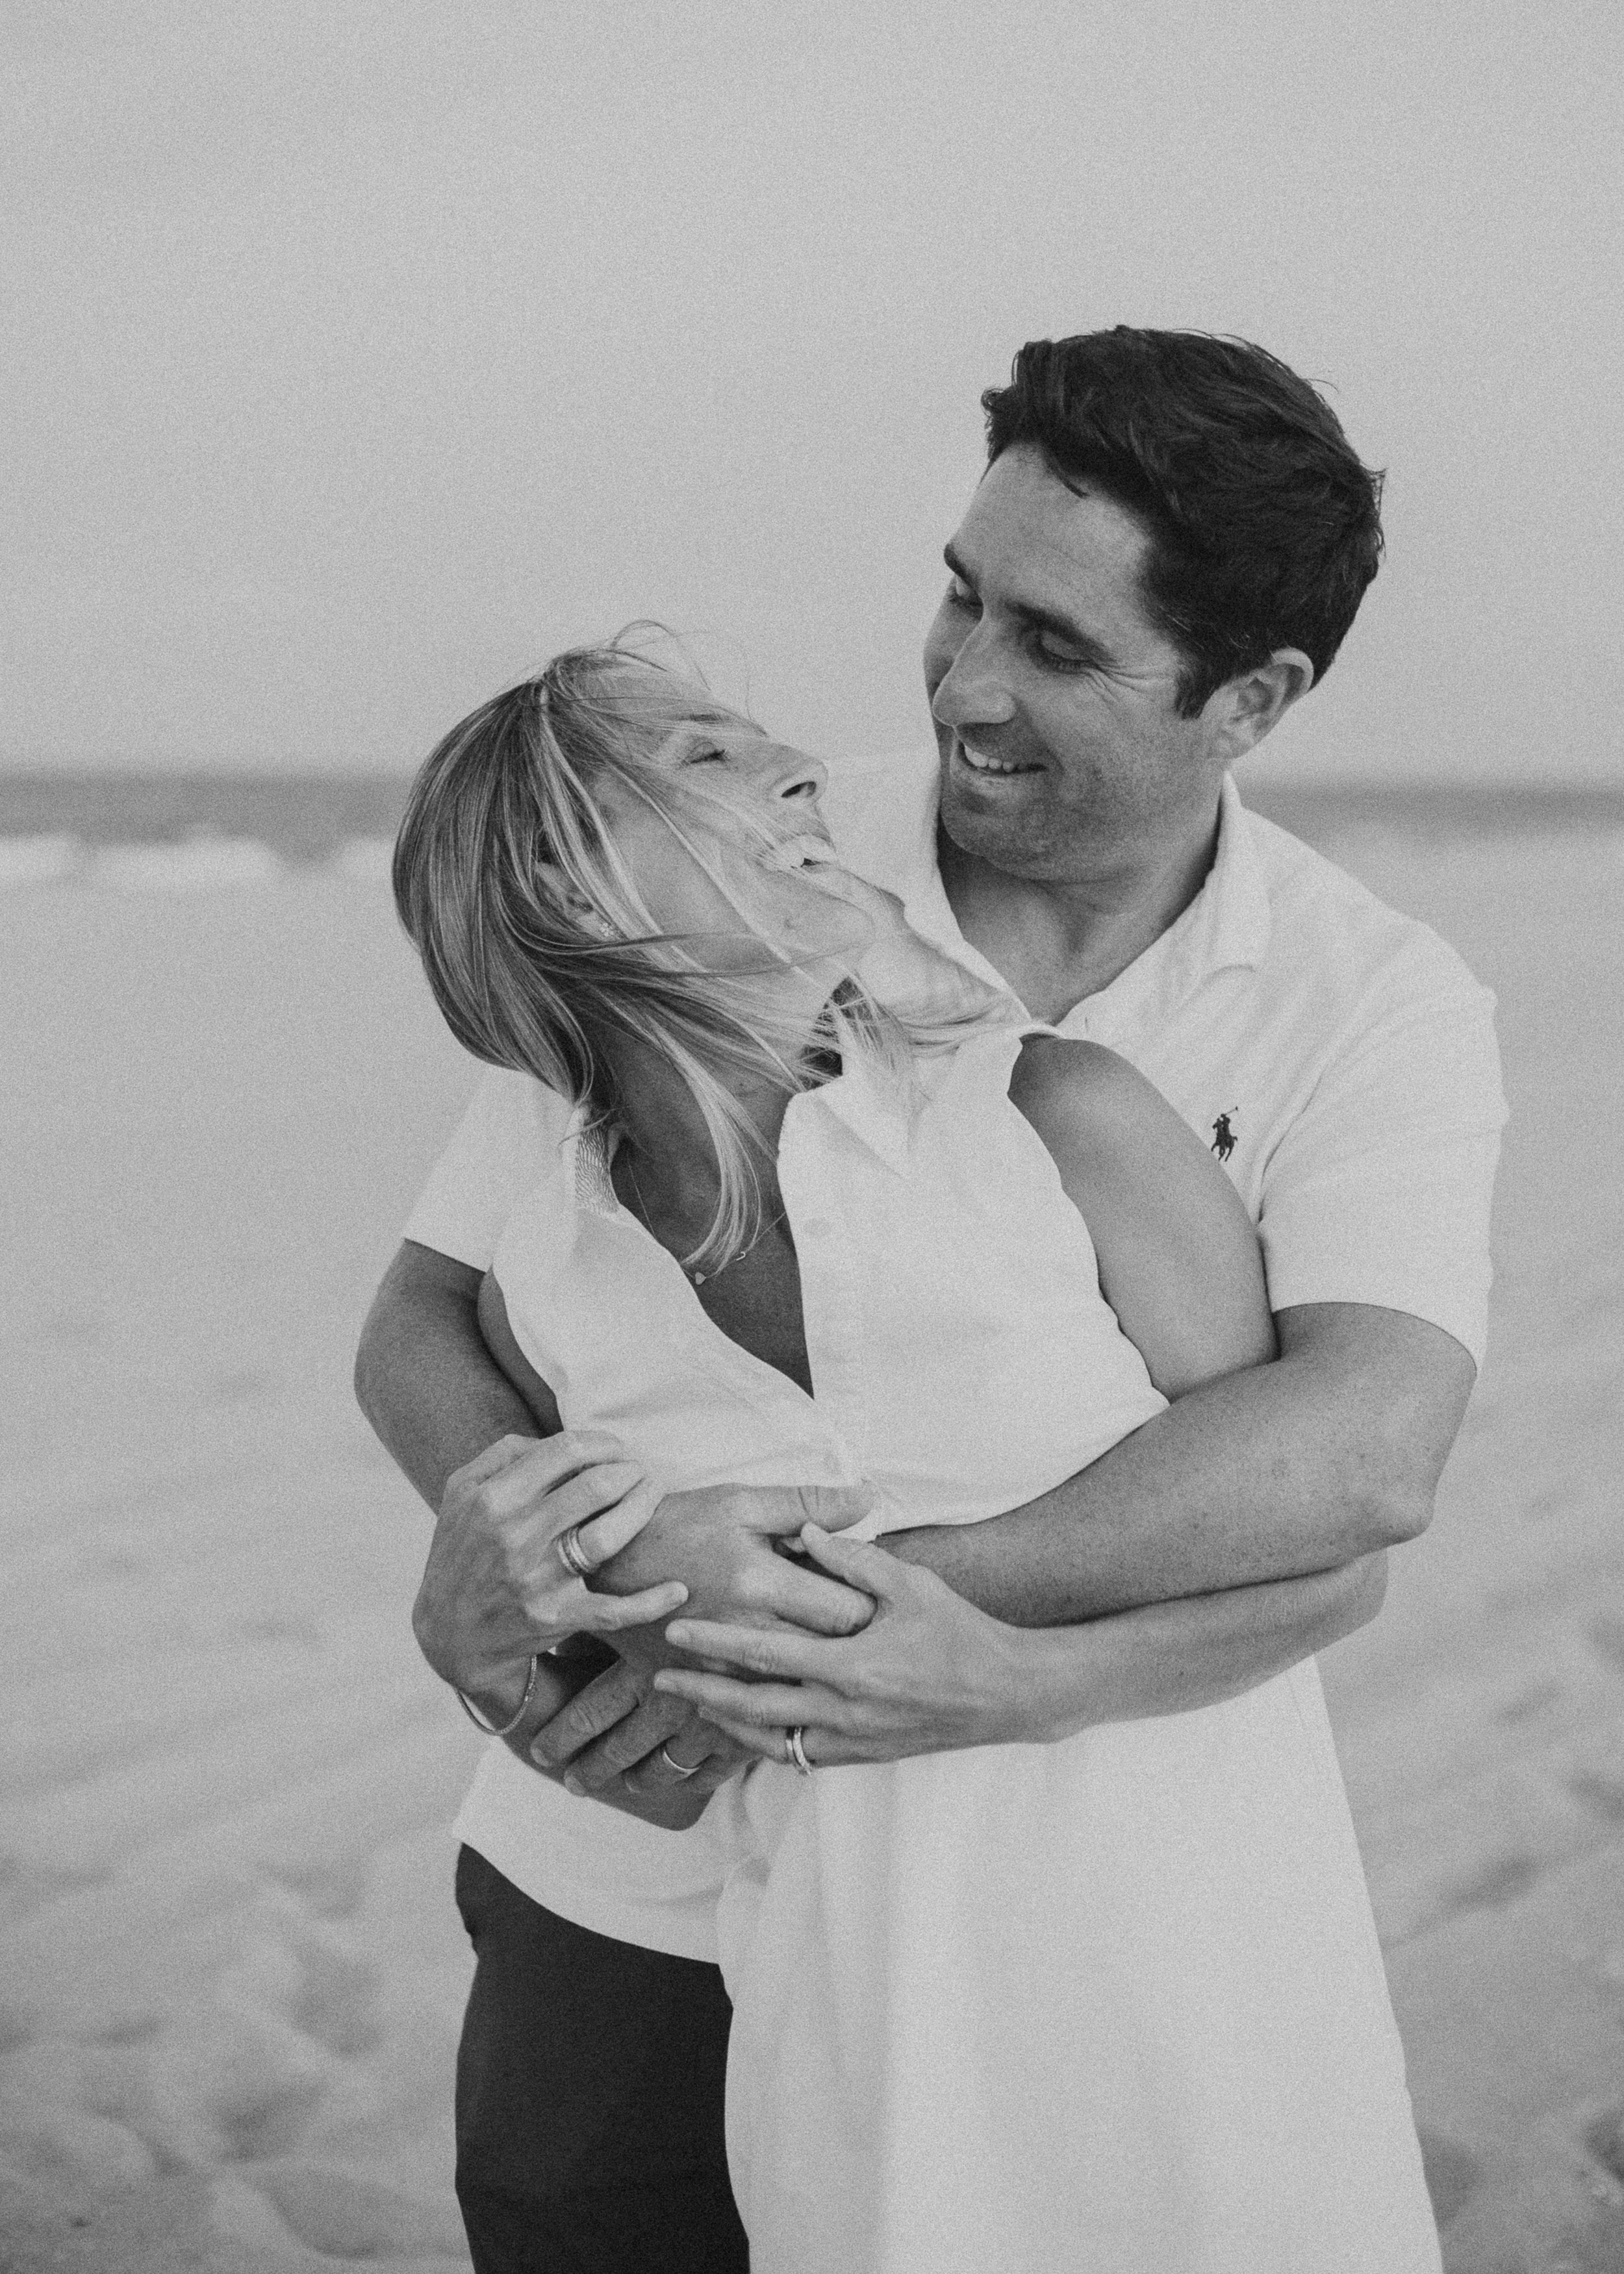 Man embracing woman from behind as she looks back at him and smiles. In black and white.